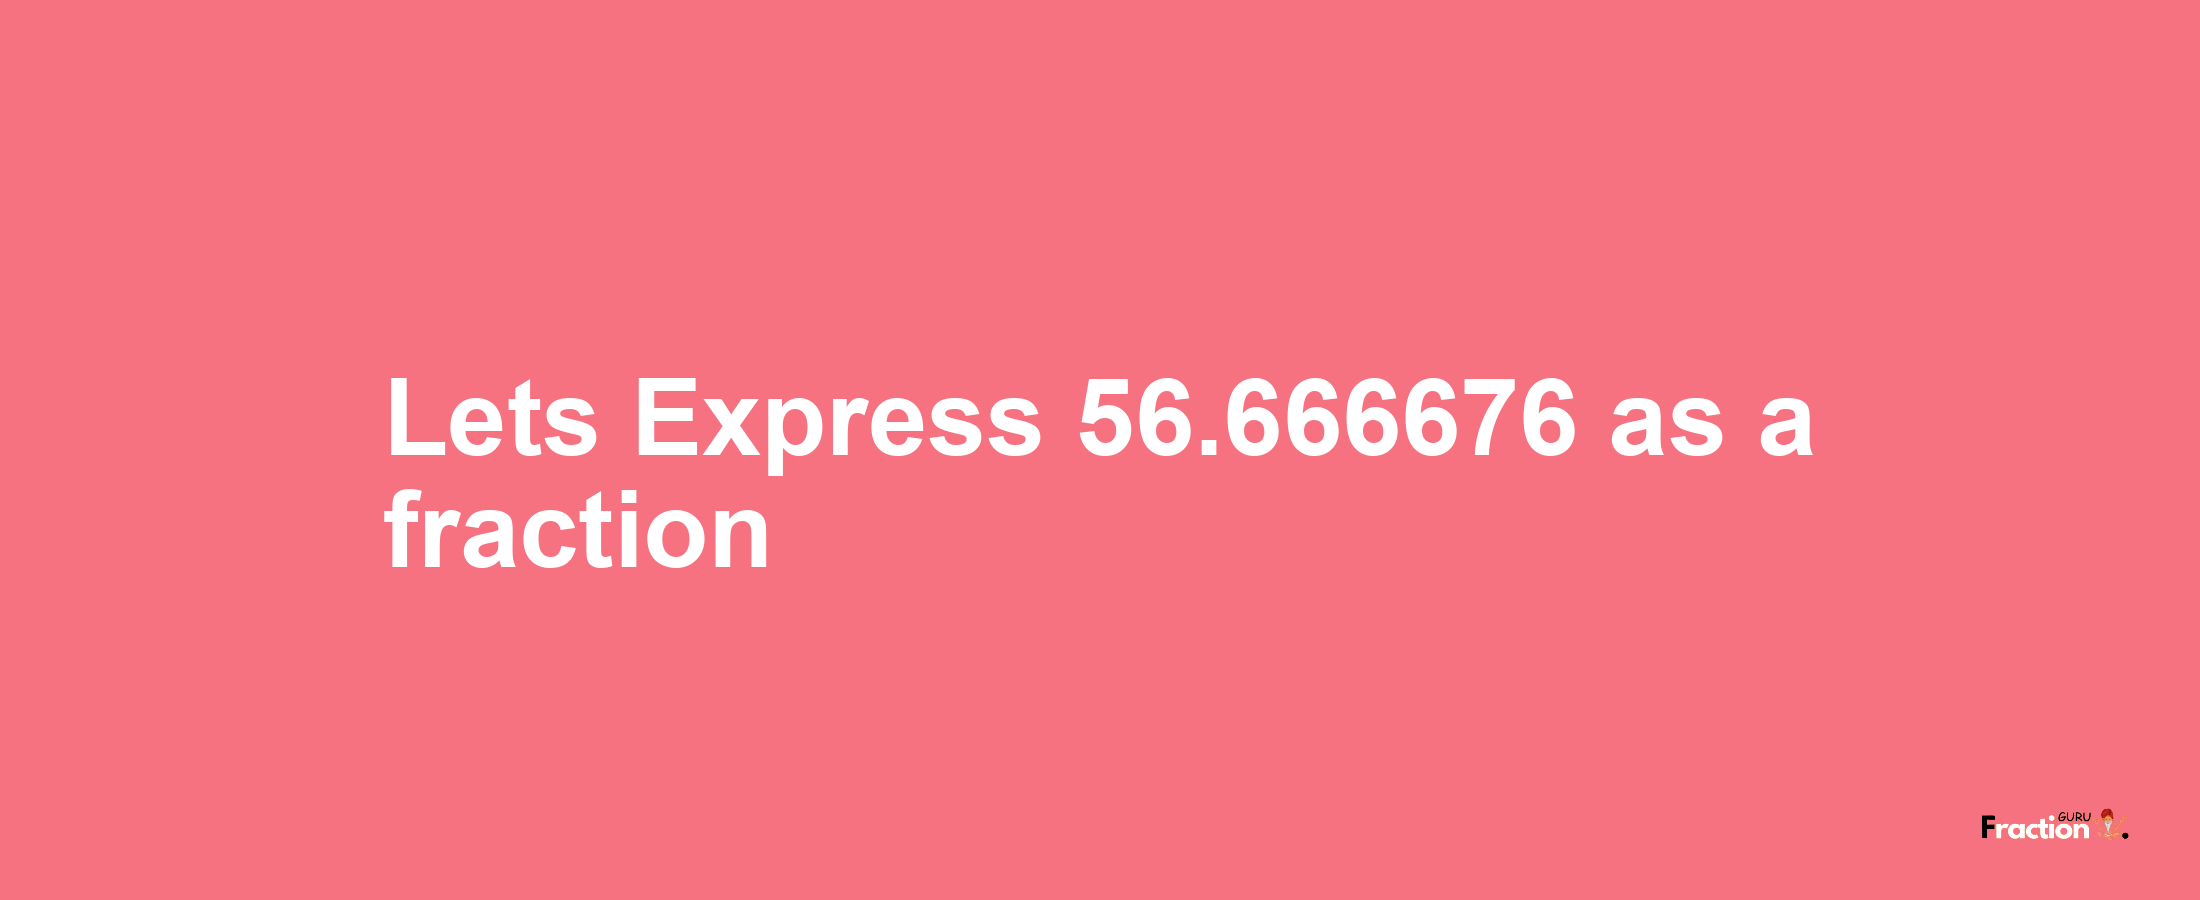 Lets Express 56.666676 as afraction